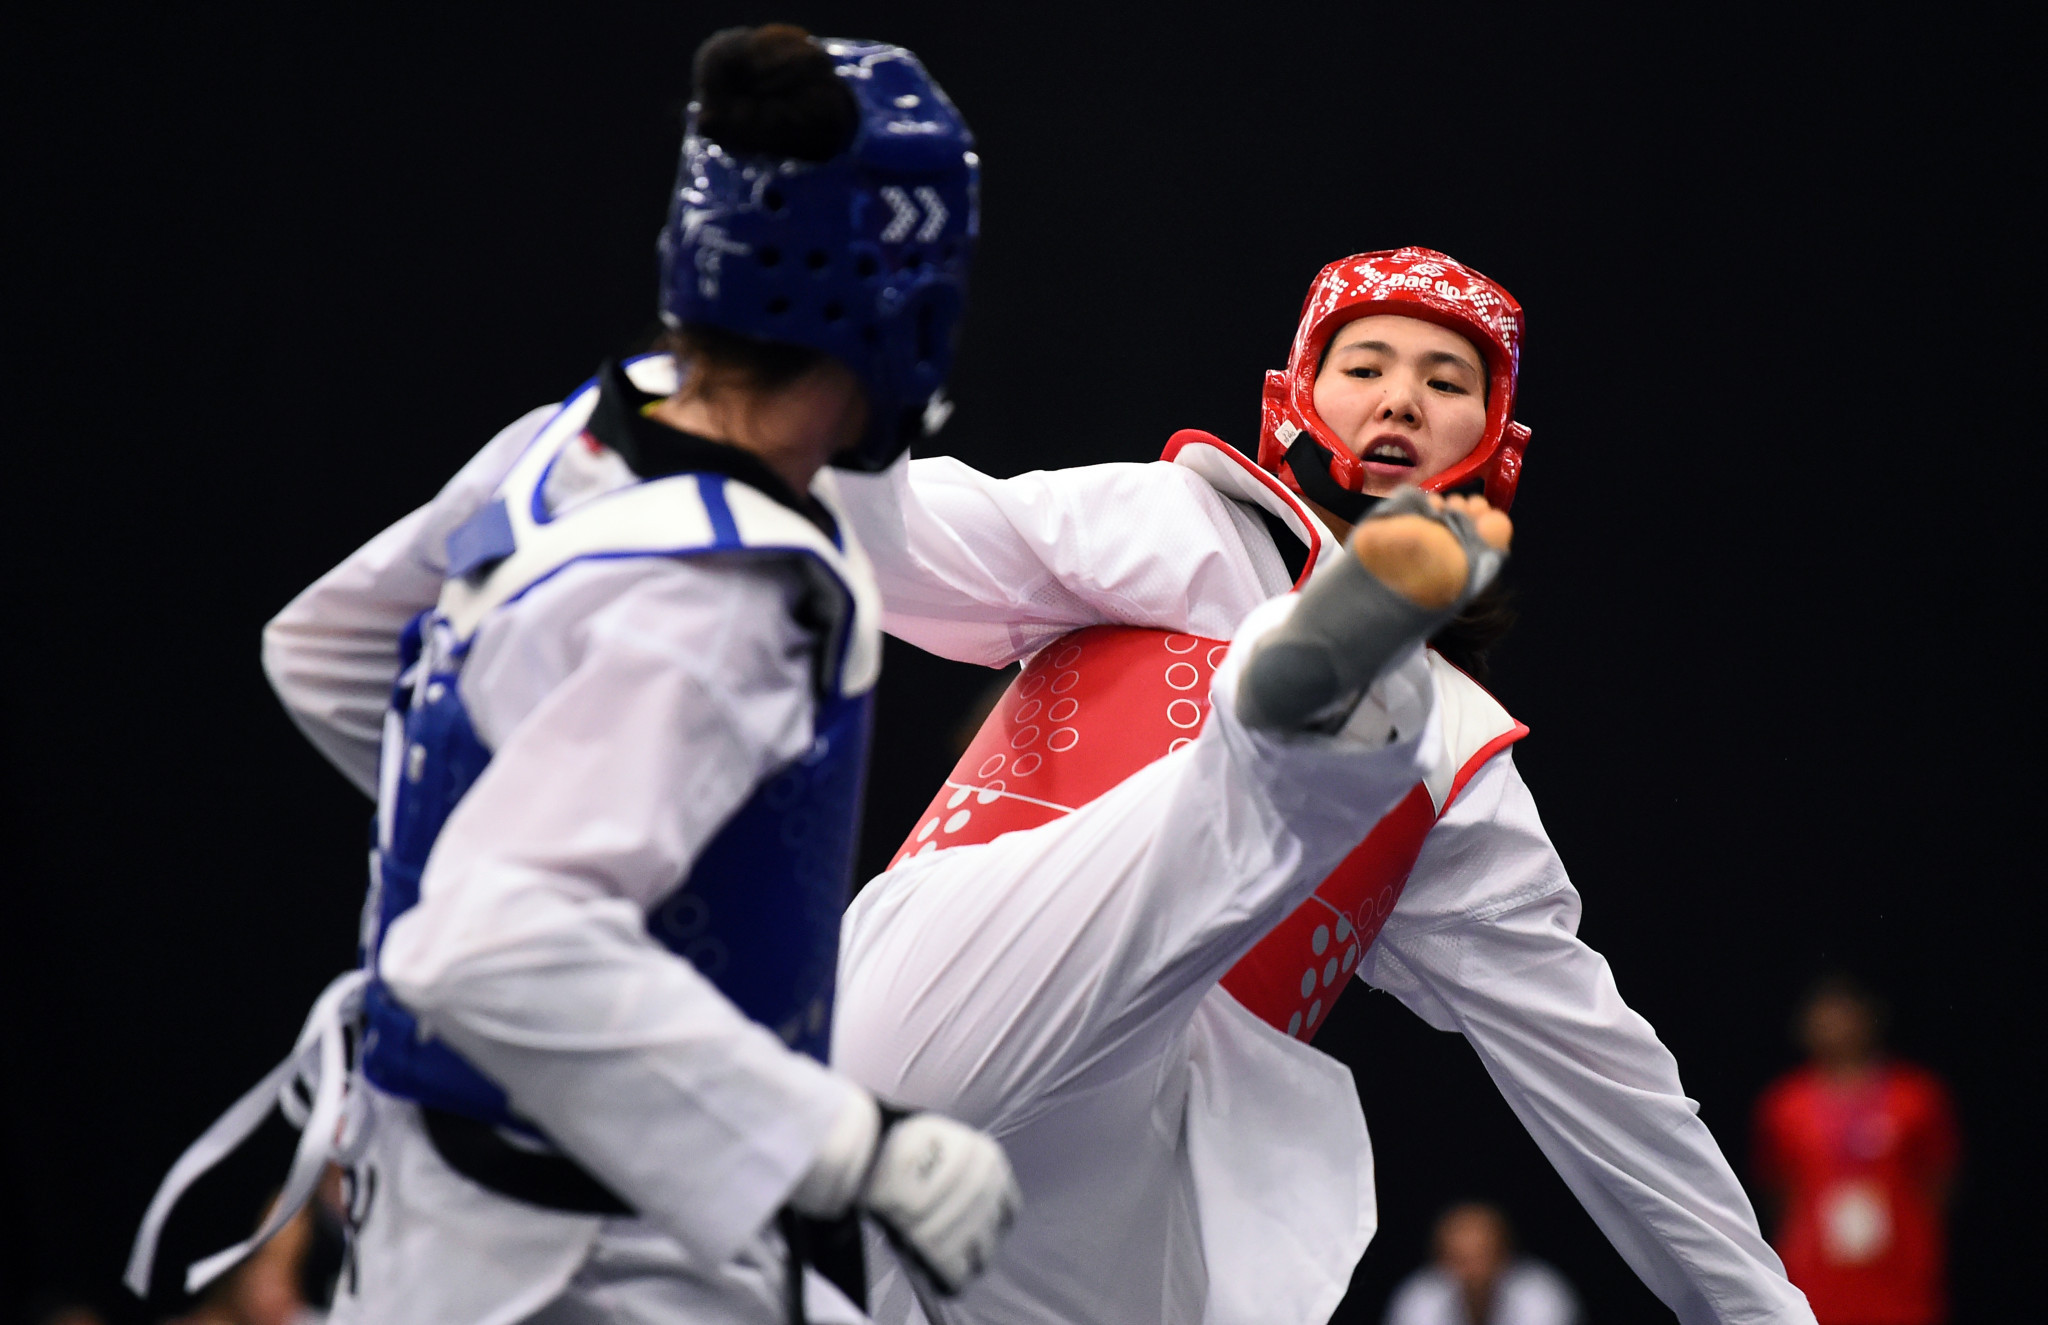 Zheng Shuyin helped hosts China to a haul of seven gold medals at the World Taekwondo Grand Slam Champions Series qualifier in Wuxi ©Getty Images